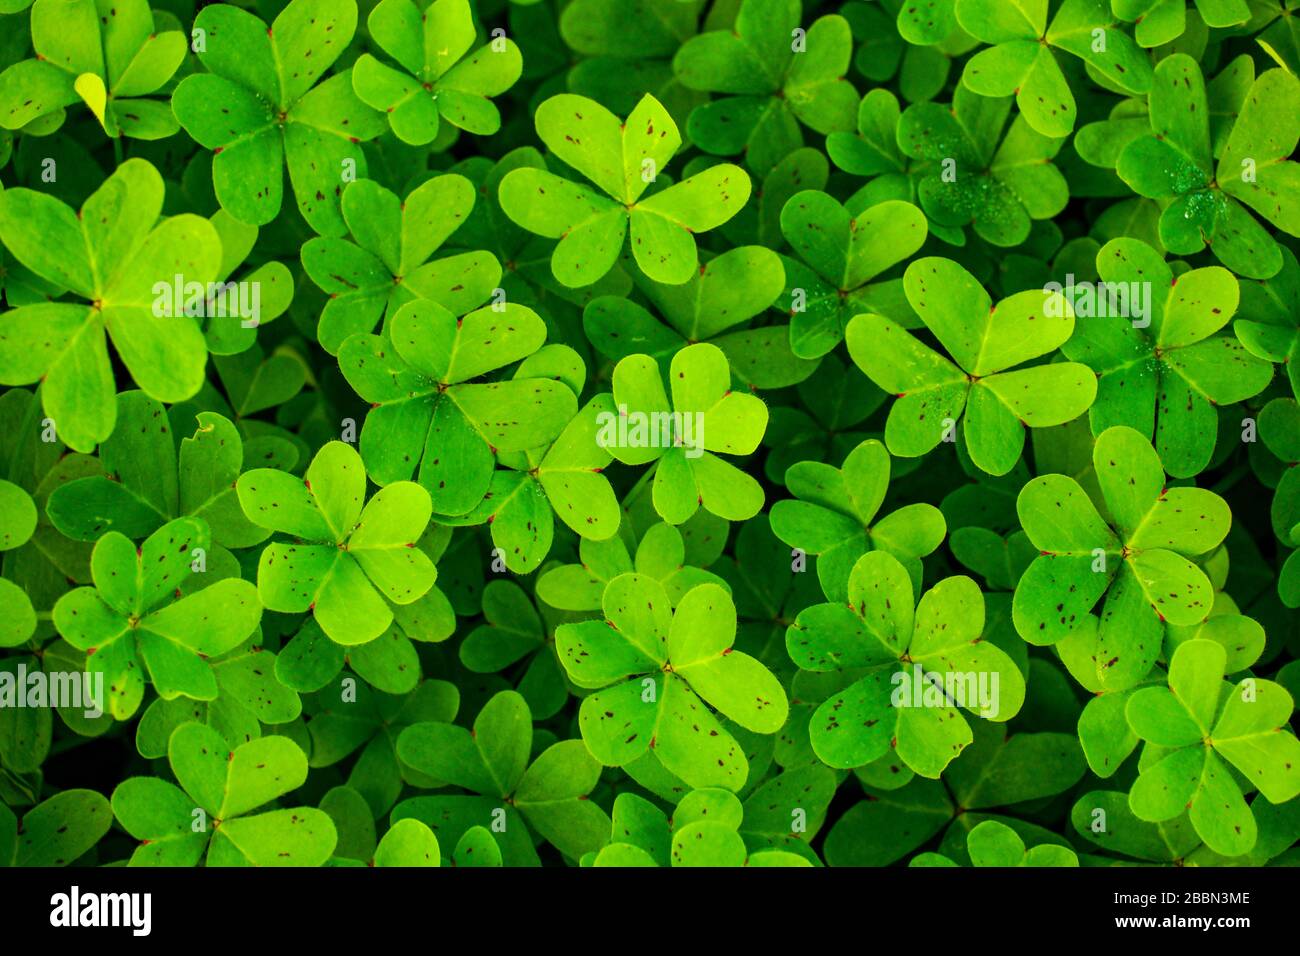 Lucky four leaf clovers on the field. Top view of many green plants with three leaf symbol of St. Patrick's day holiday. Stock Photo